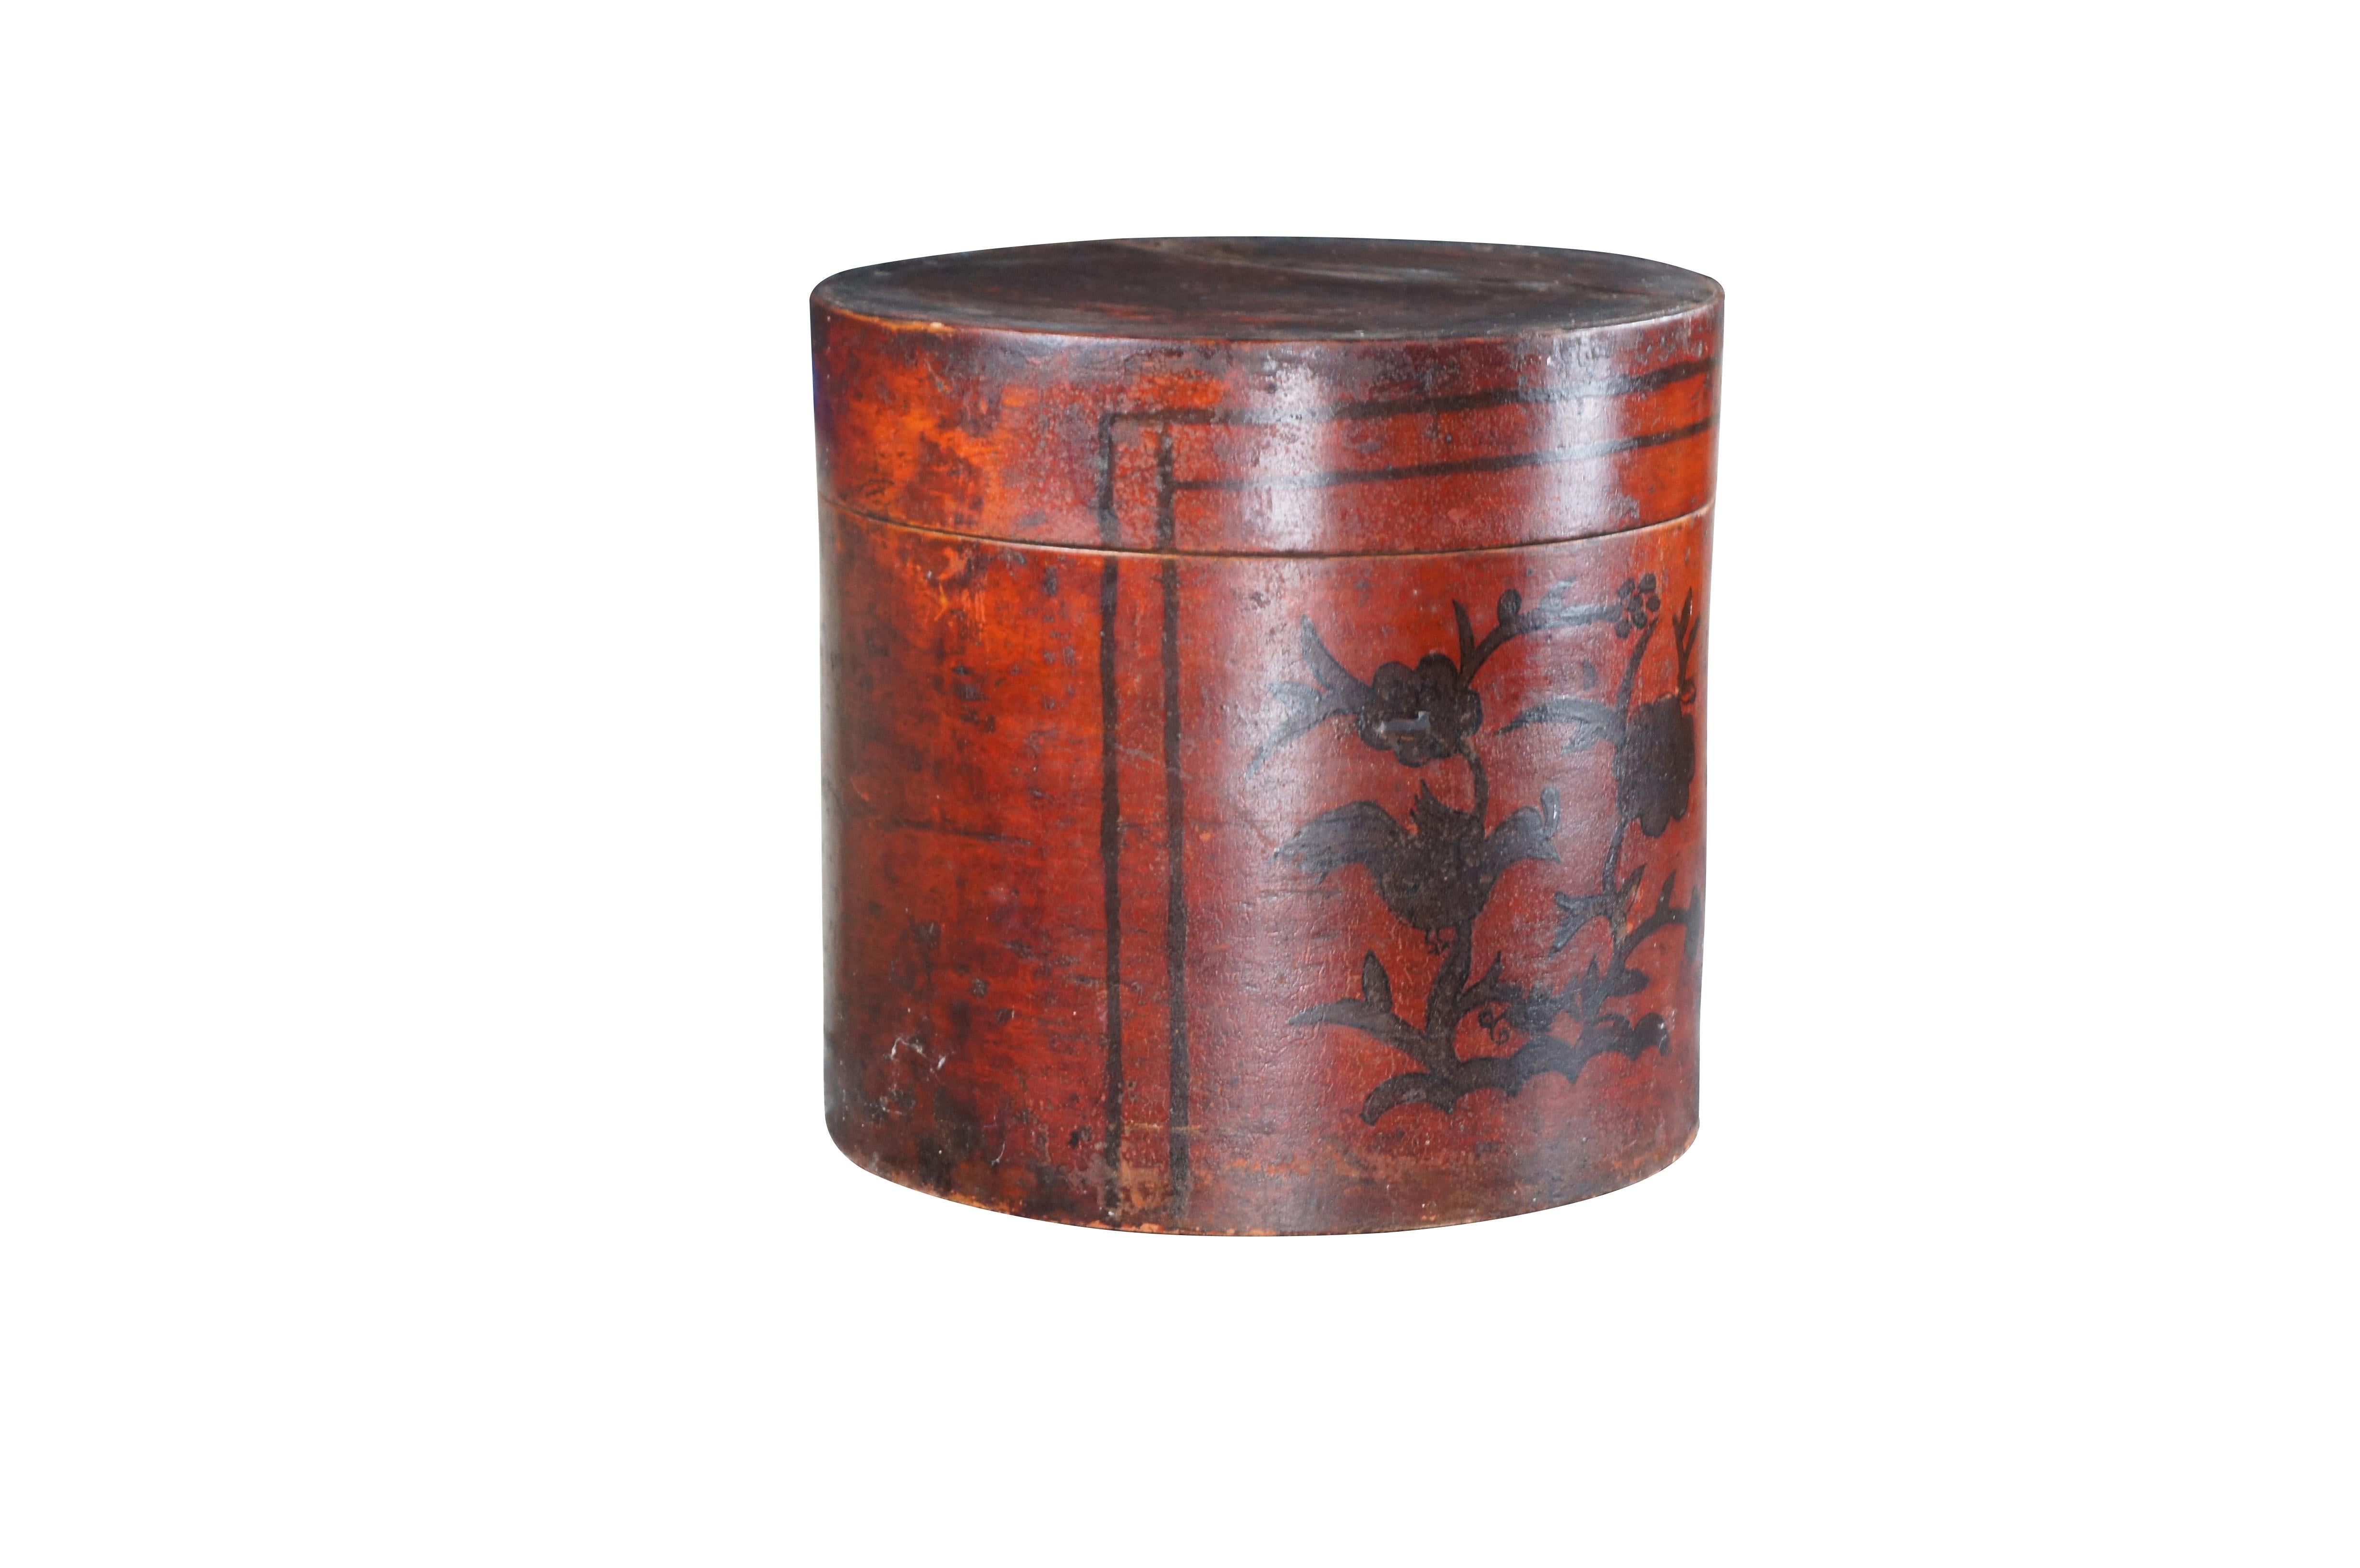 Antique Chinese Shanxi Red Lacquer Poplar Hat / Tea Box. Features a floral decorated design over red lacquer finish.

Dimensions:
13